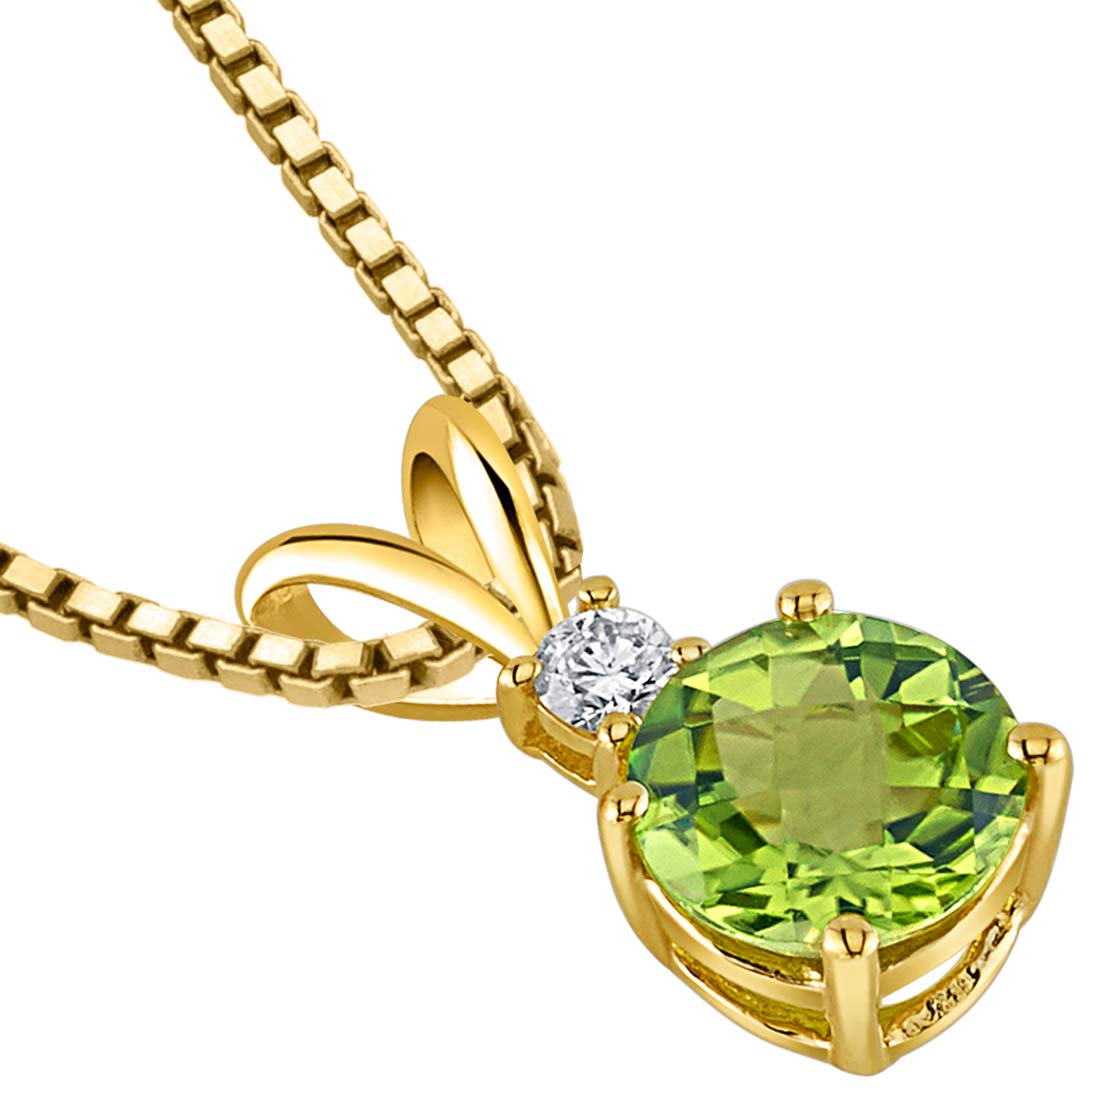 Peora Peridot with Genuine Diamond Pendant in 14K Yellow Gold, Elegant Solitaire, Round Shape, 6.50mm, 1 Carat total